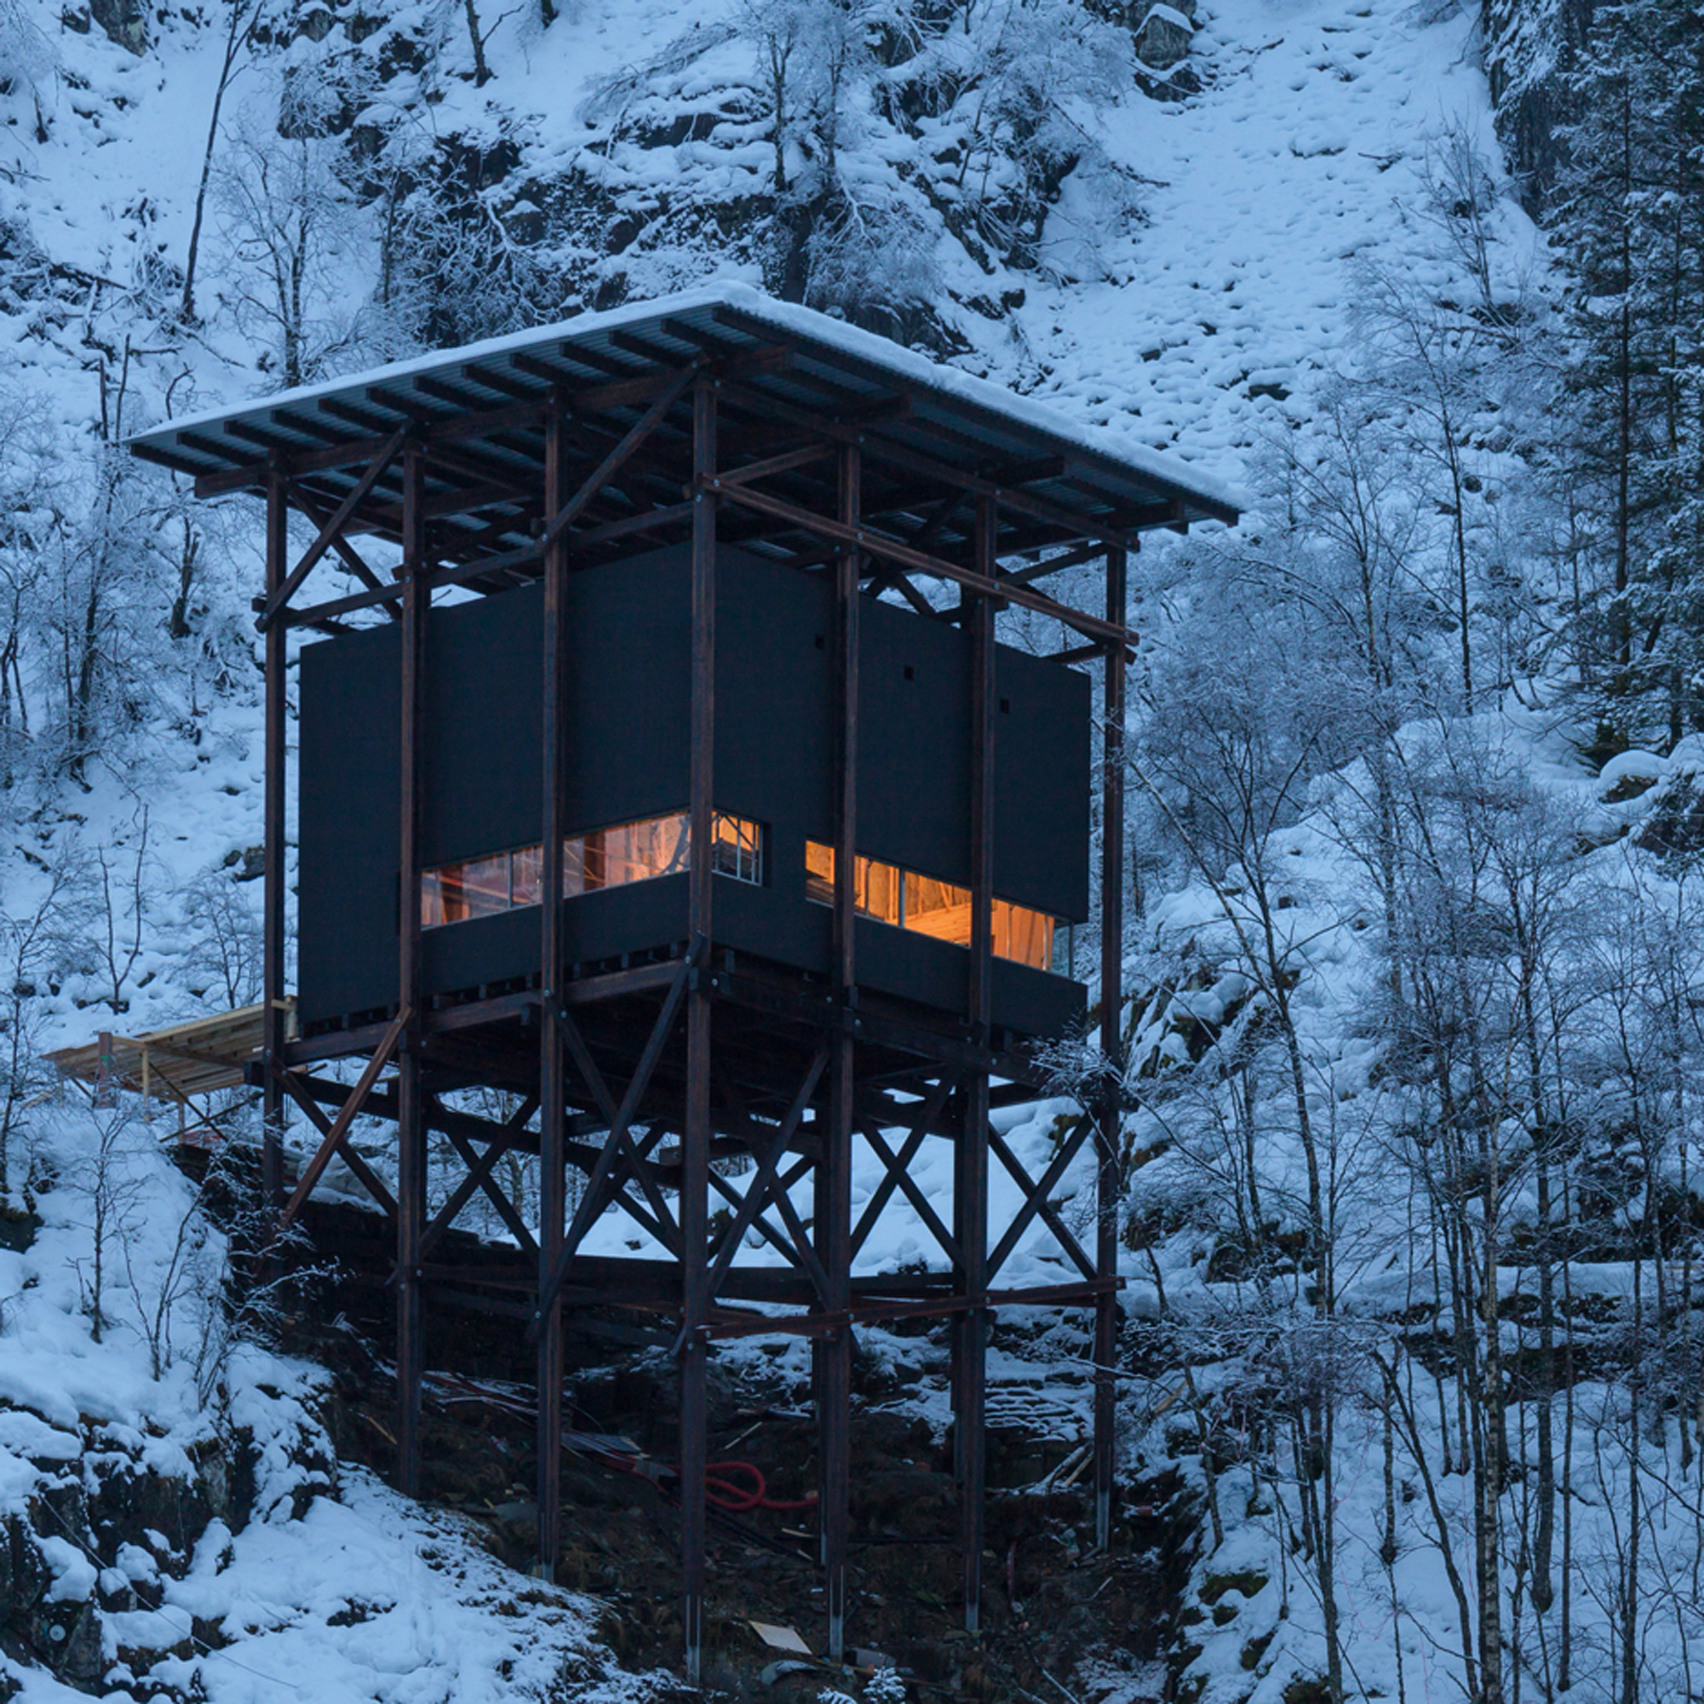 Peter Zumthor's visitor facilities at a historic mine in Norway